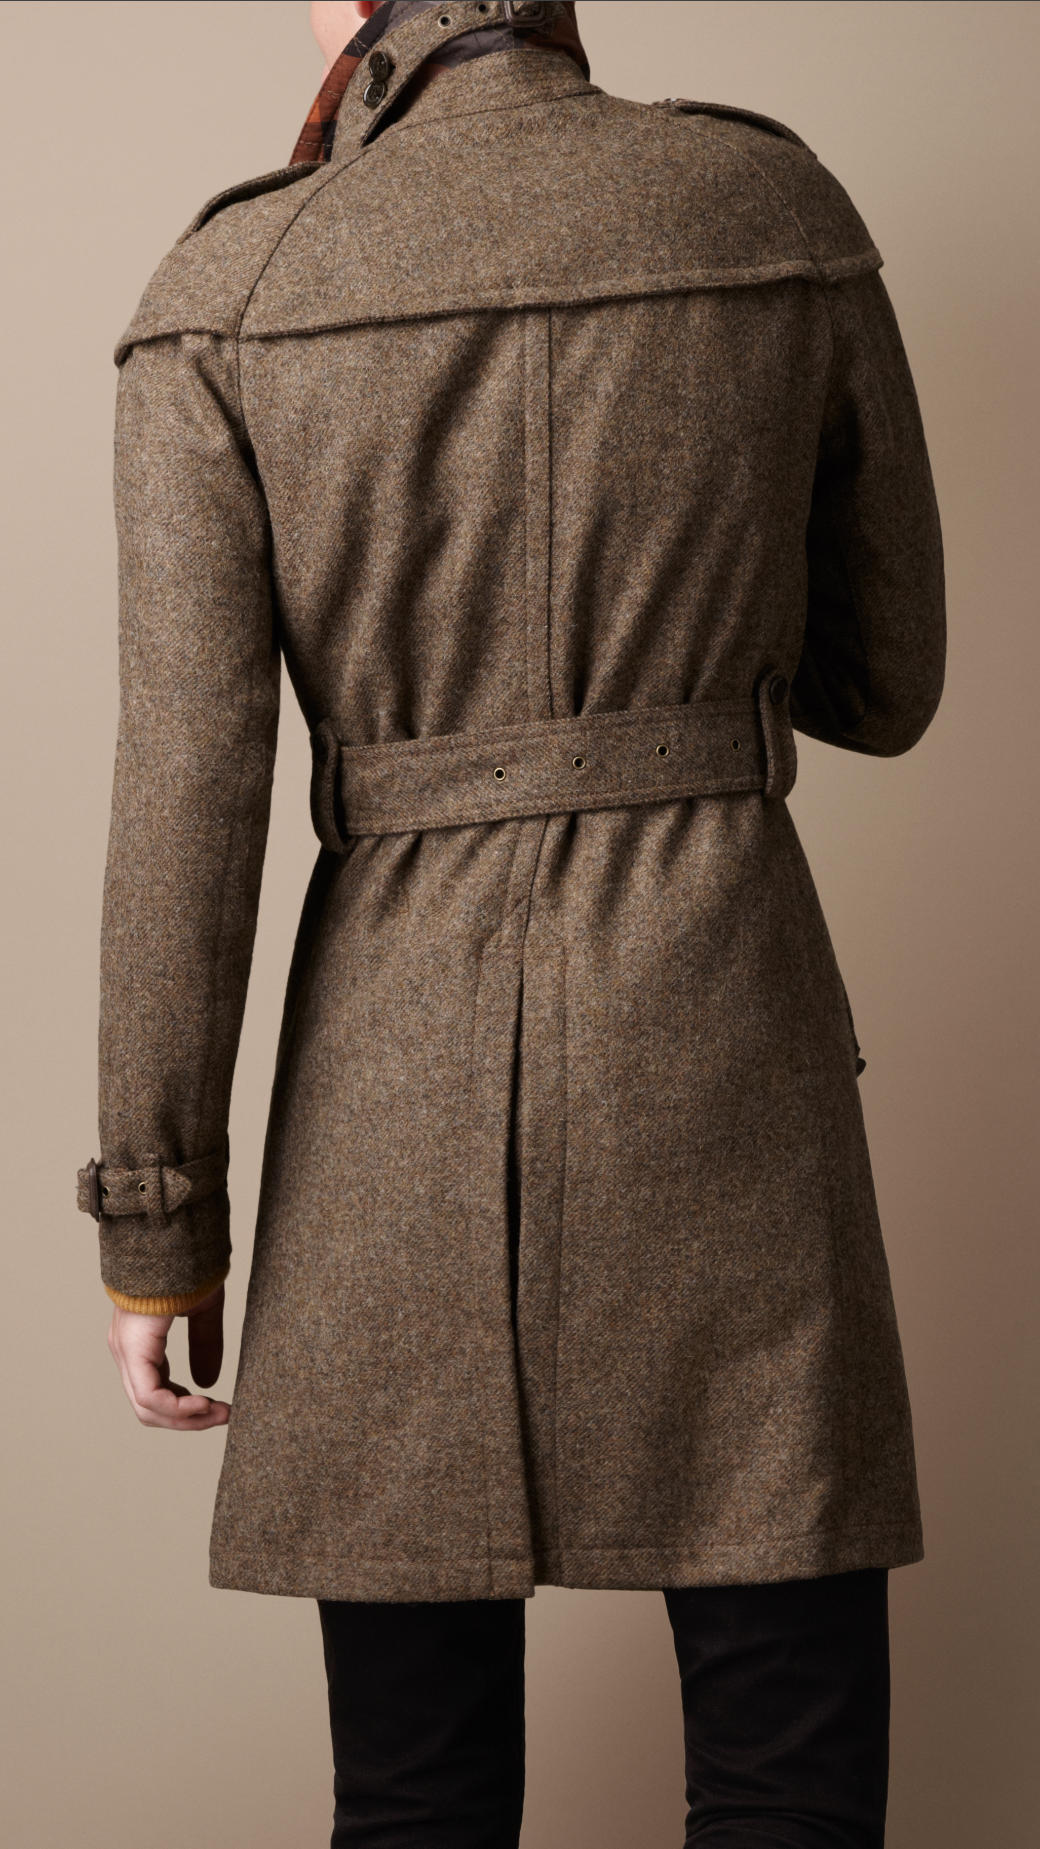 Lyst - Burberry Brit Midlength Wool Tweed Trench Coat in Brown for Men